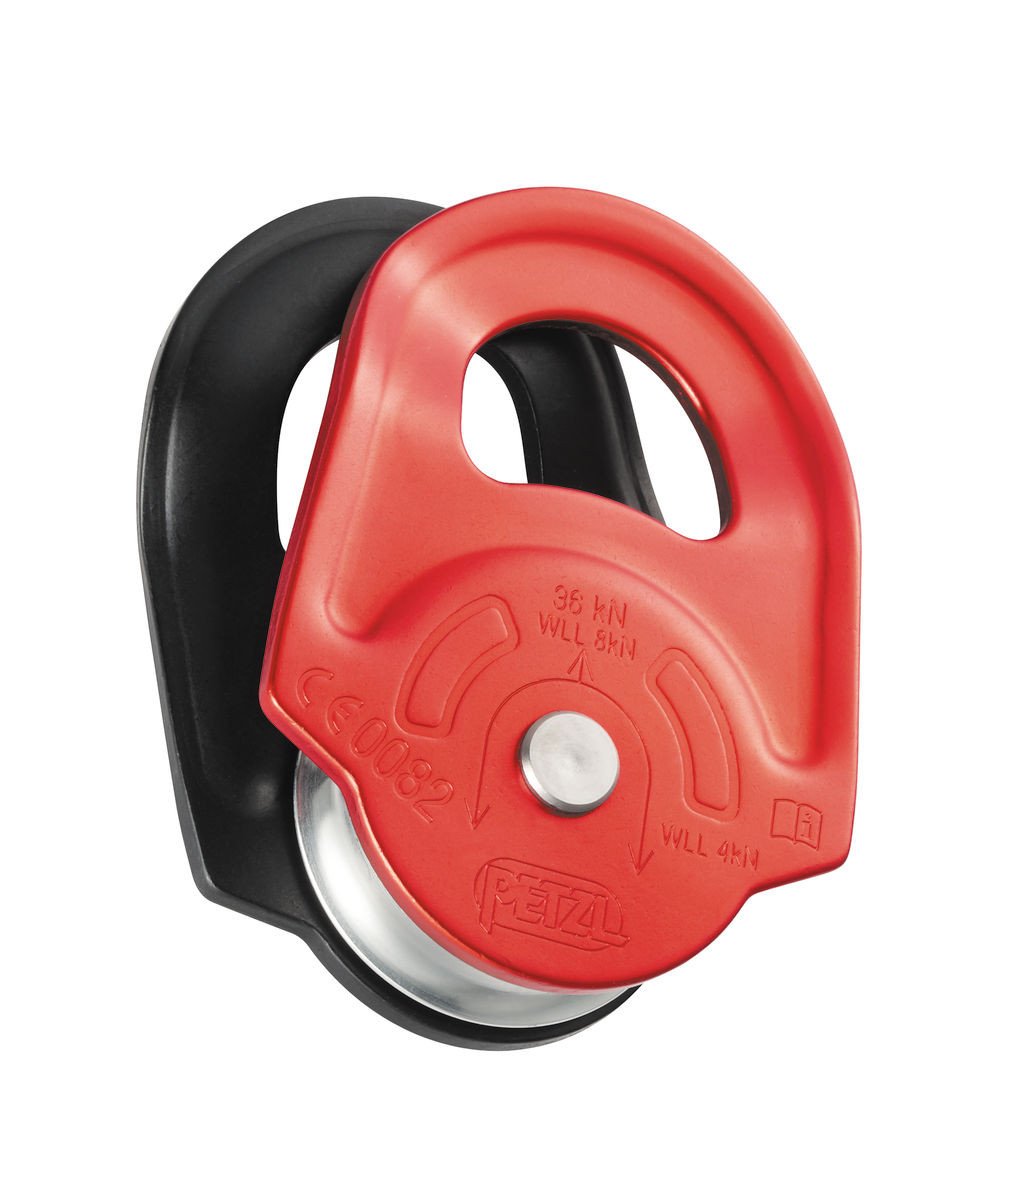 This high-efficiency pulley is ideal for intensive use by rescue professionals, designed to maneuver heavy loads, height safety, confined space and many more.